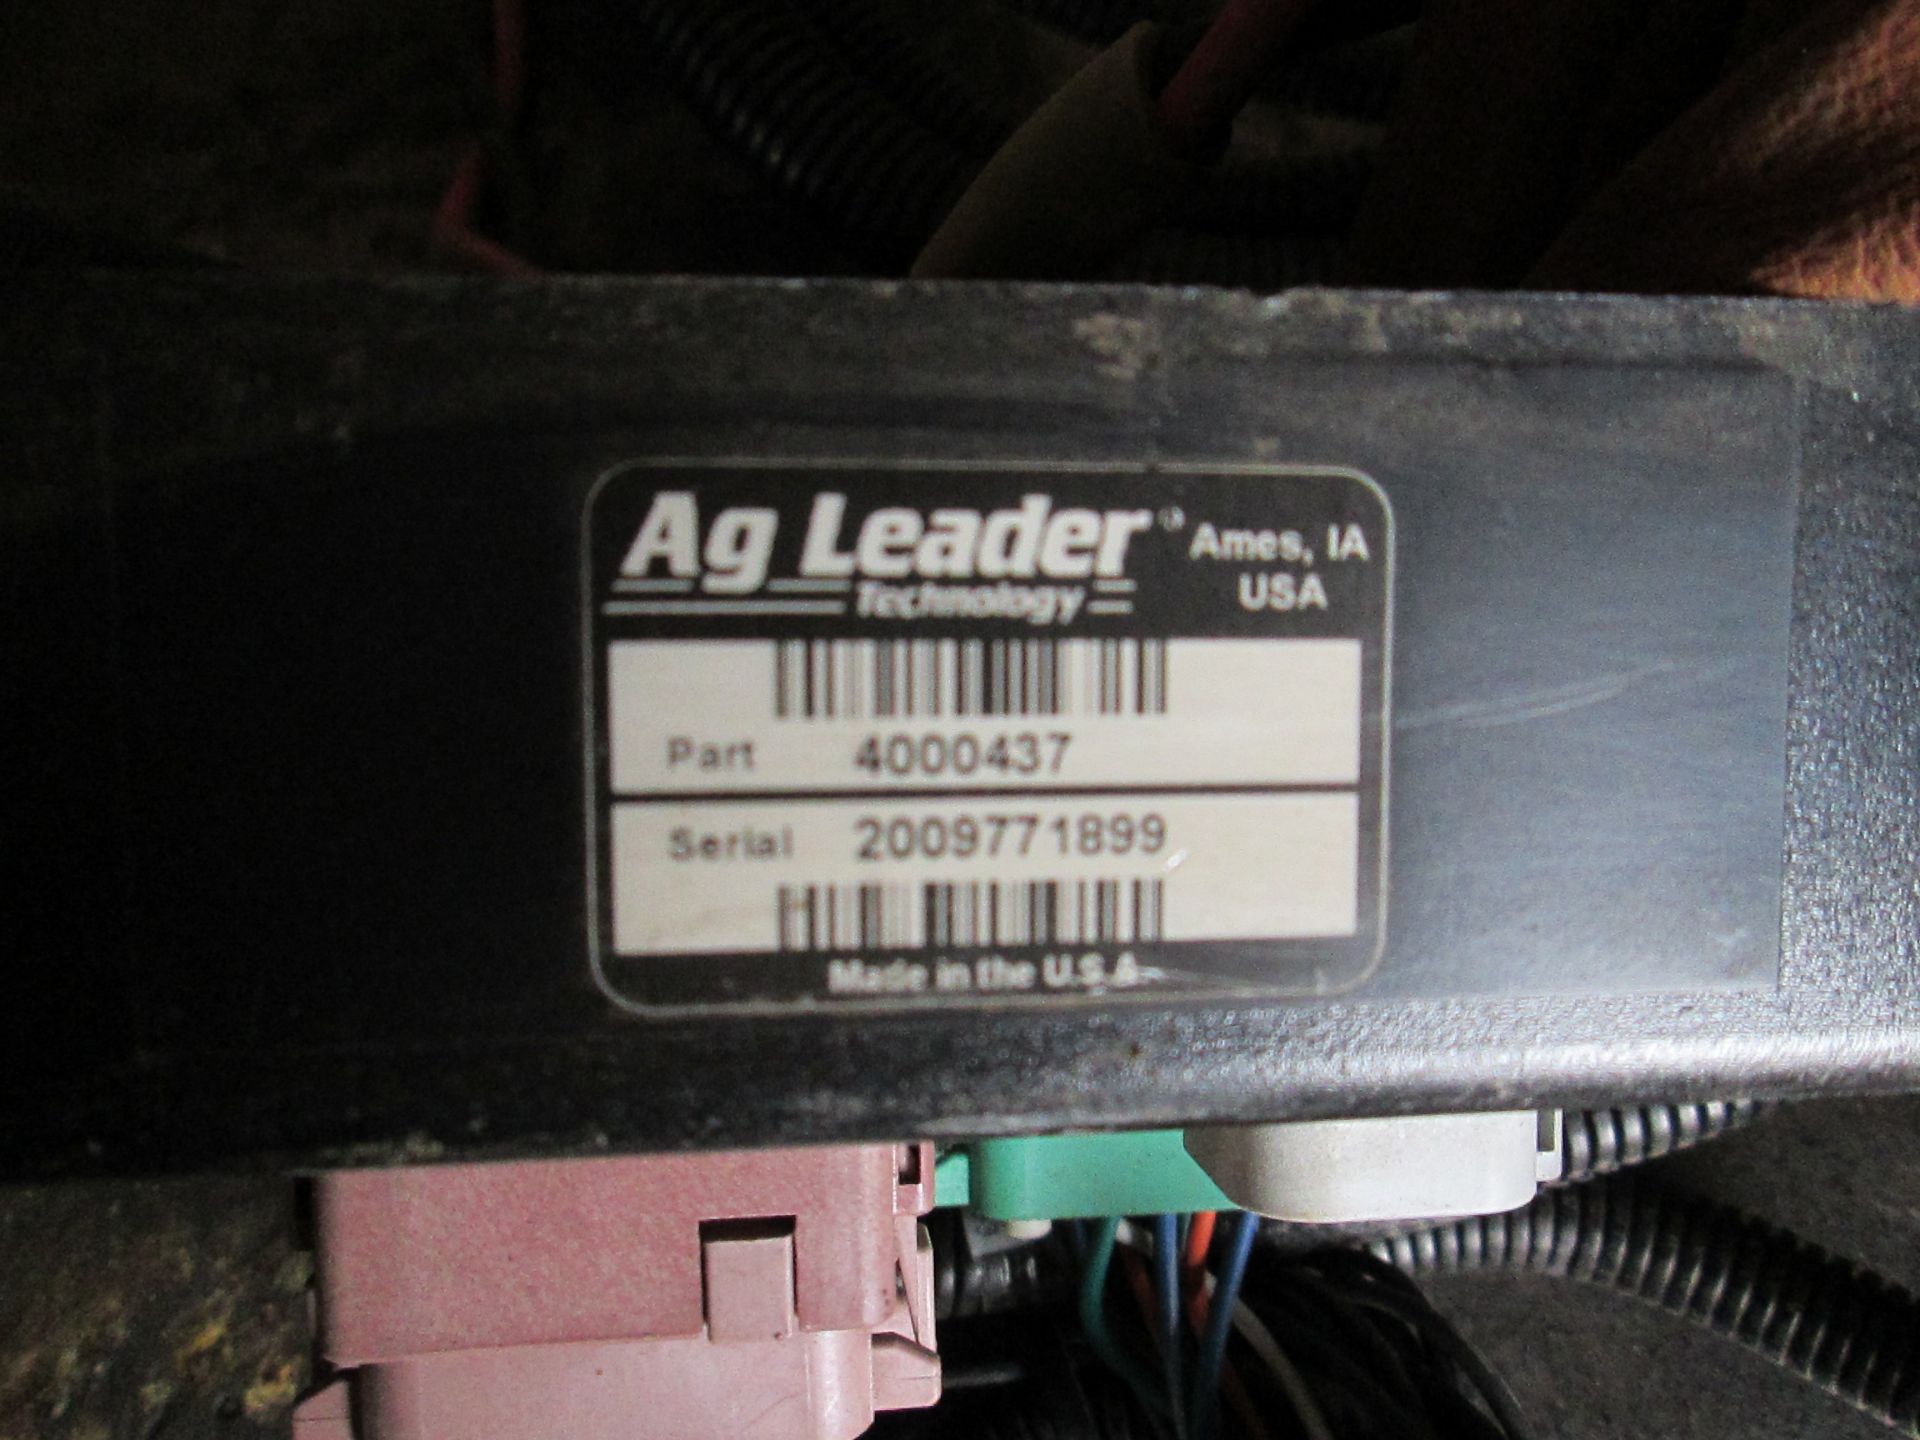 AG LEADER INTEGRA MONITOR, AUTO SWATH, MULTI PRODUCT; CAN BE USED FOR PLANTER OR COMBINE - Image 7 of 8